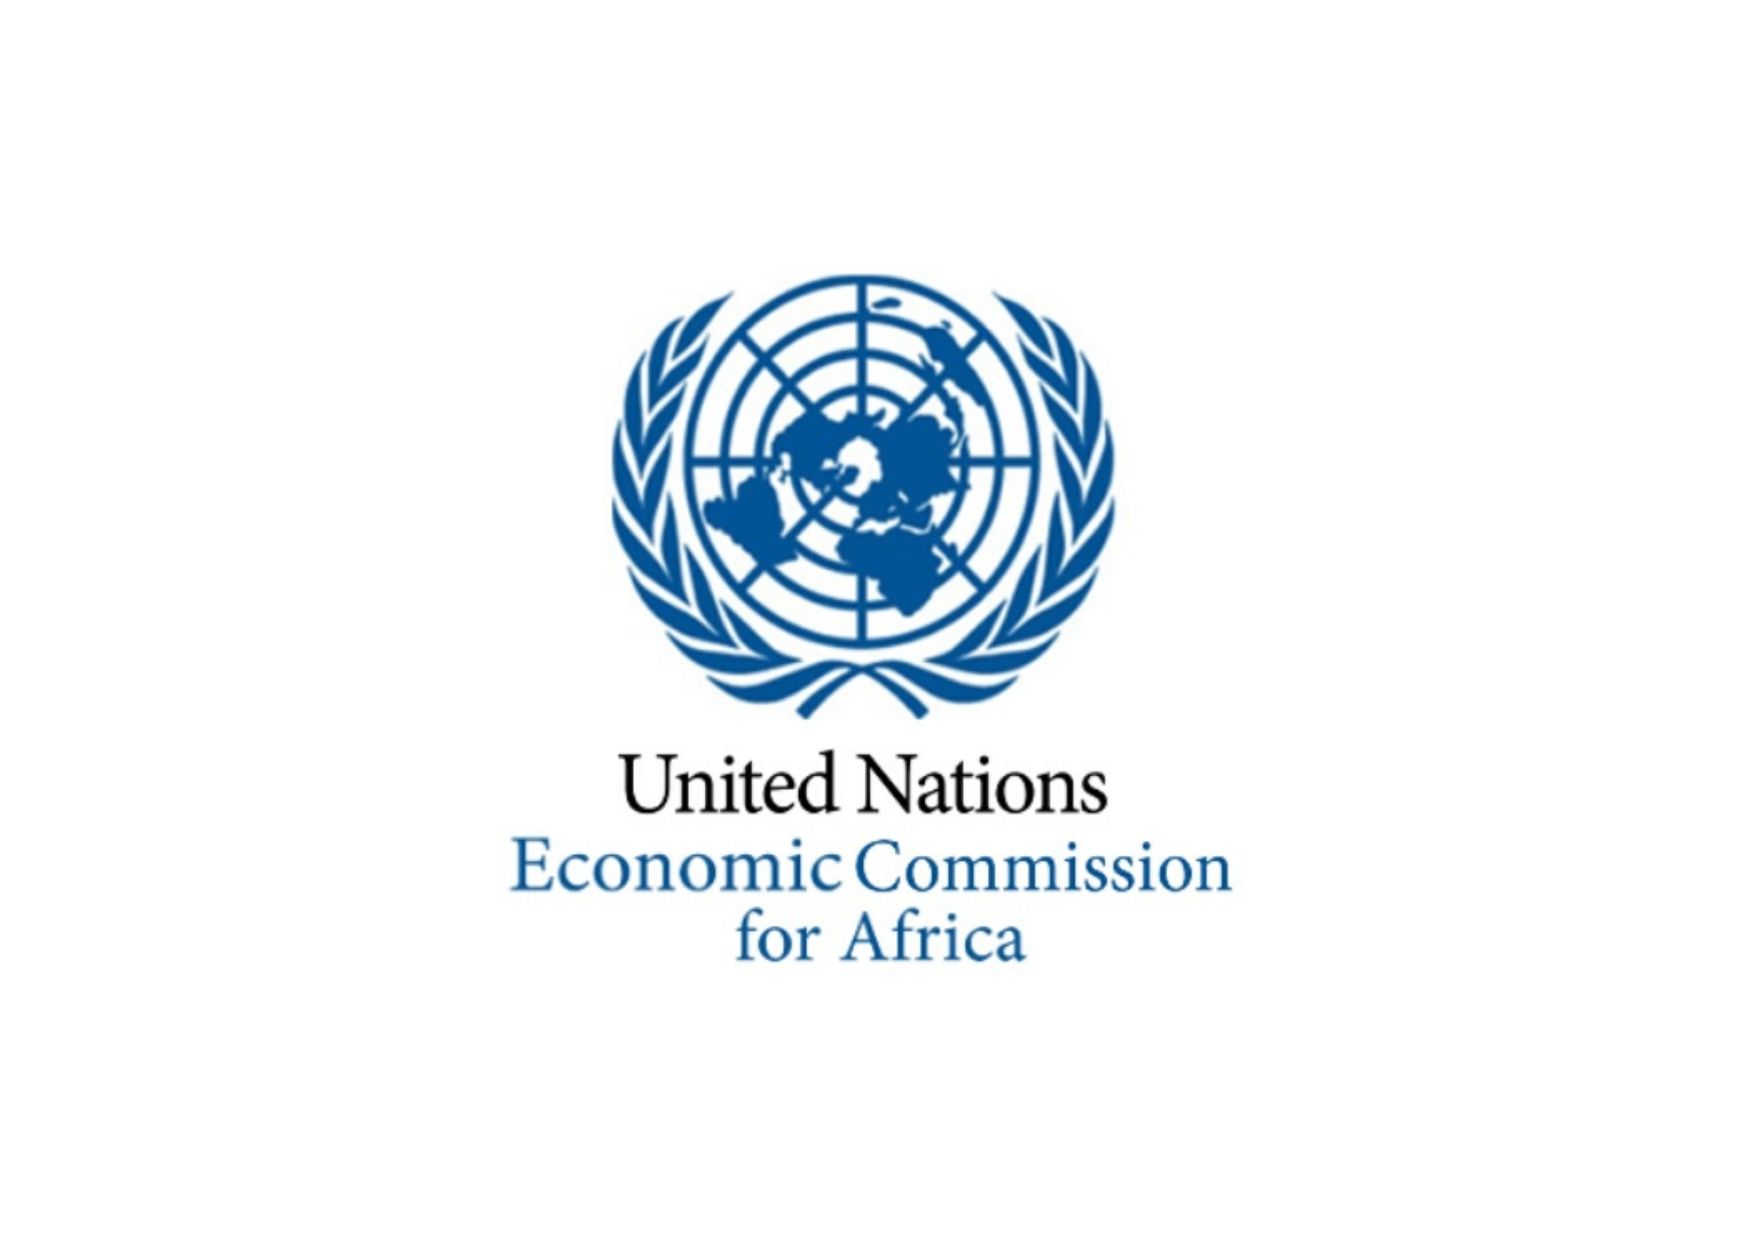 United Nations Economic Commission for Africa (UN ECA) Fellowship Programme 2021 for Young African Professionals